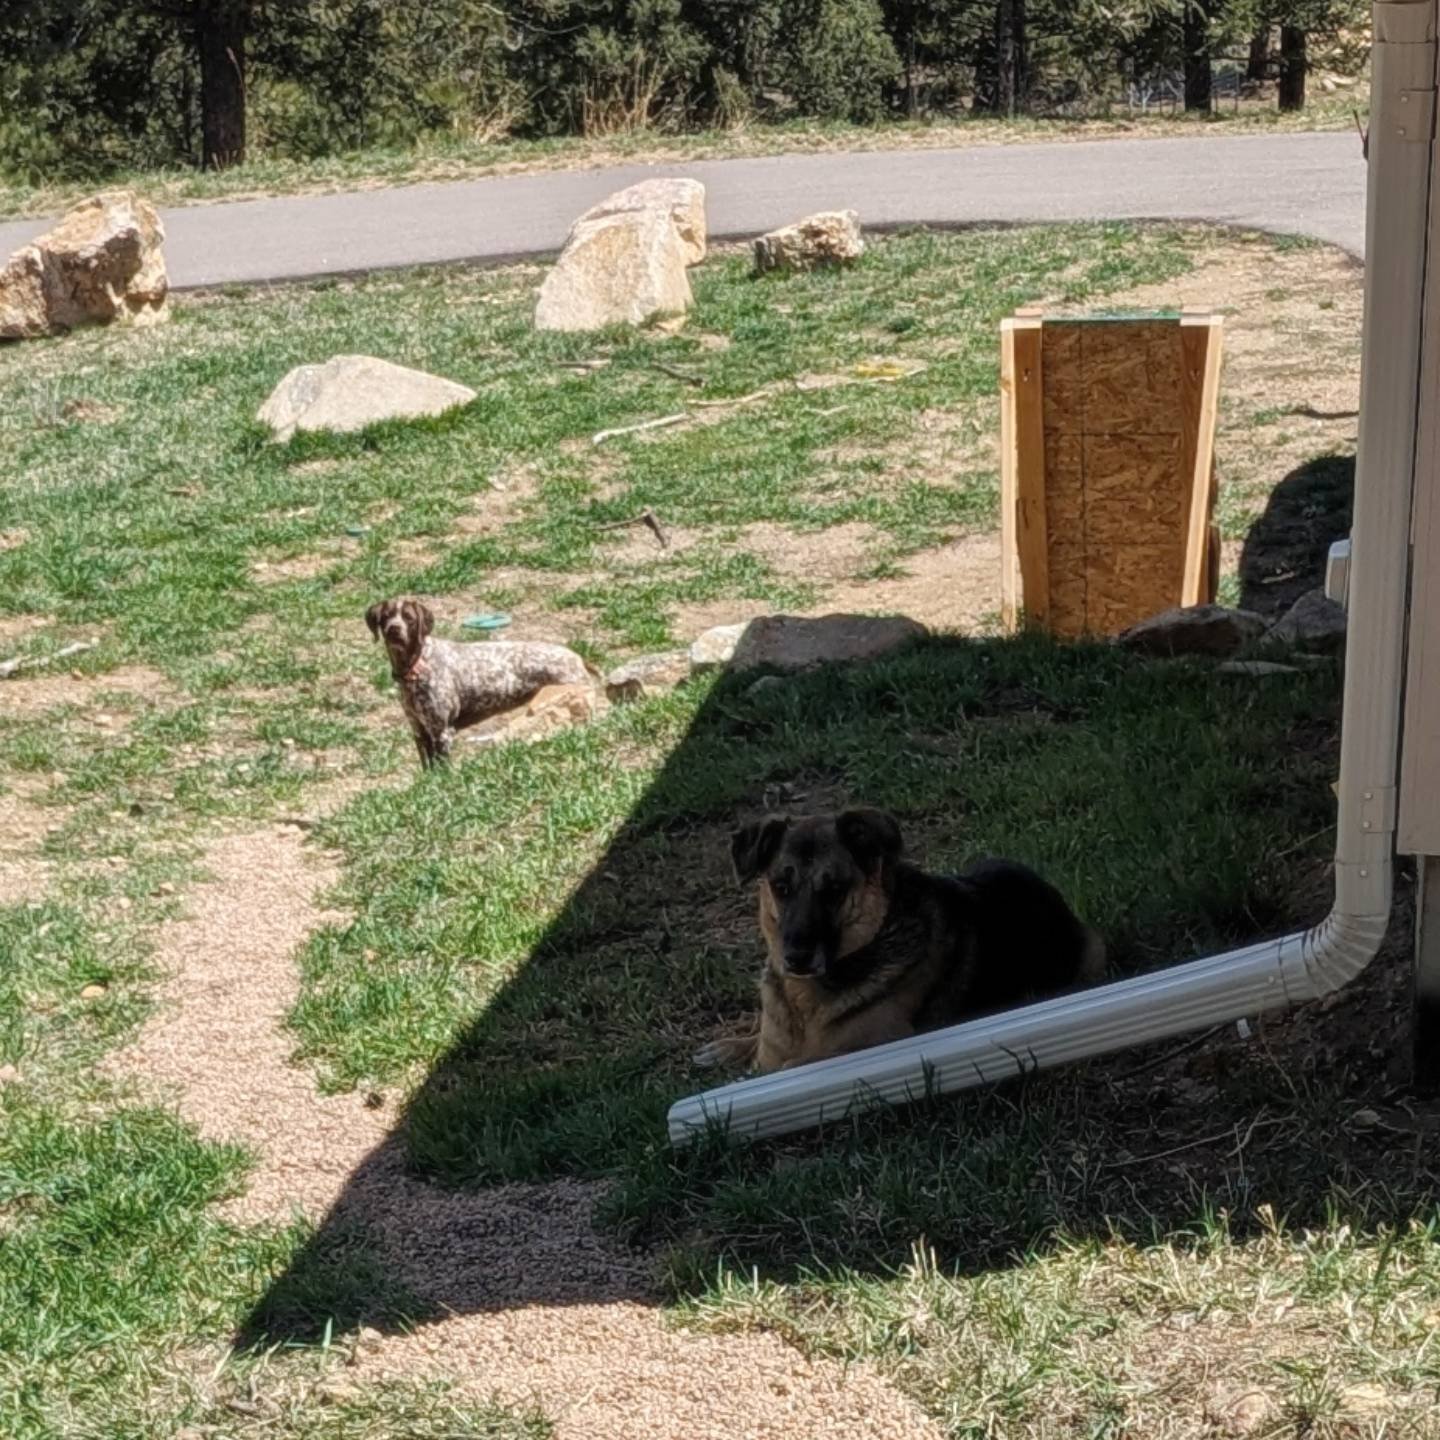 #dognamedshadow 

Should have named him Shadow bc he's always following me, and yet also always hiding in the shade. He was not made for Colorado heat 😅 

He tried to follow me out to the bees the other day but this was the closest patch of shade he